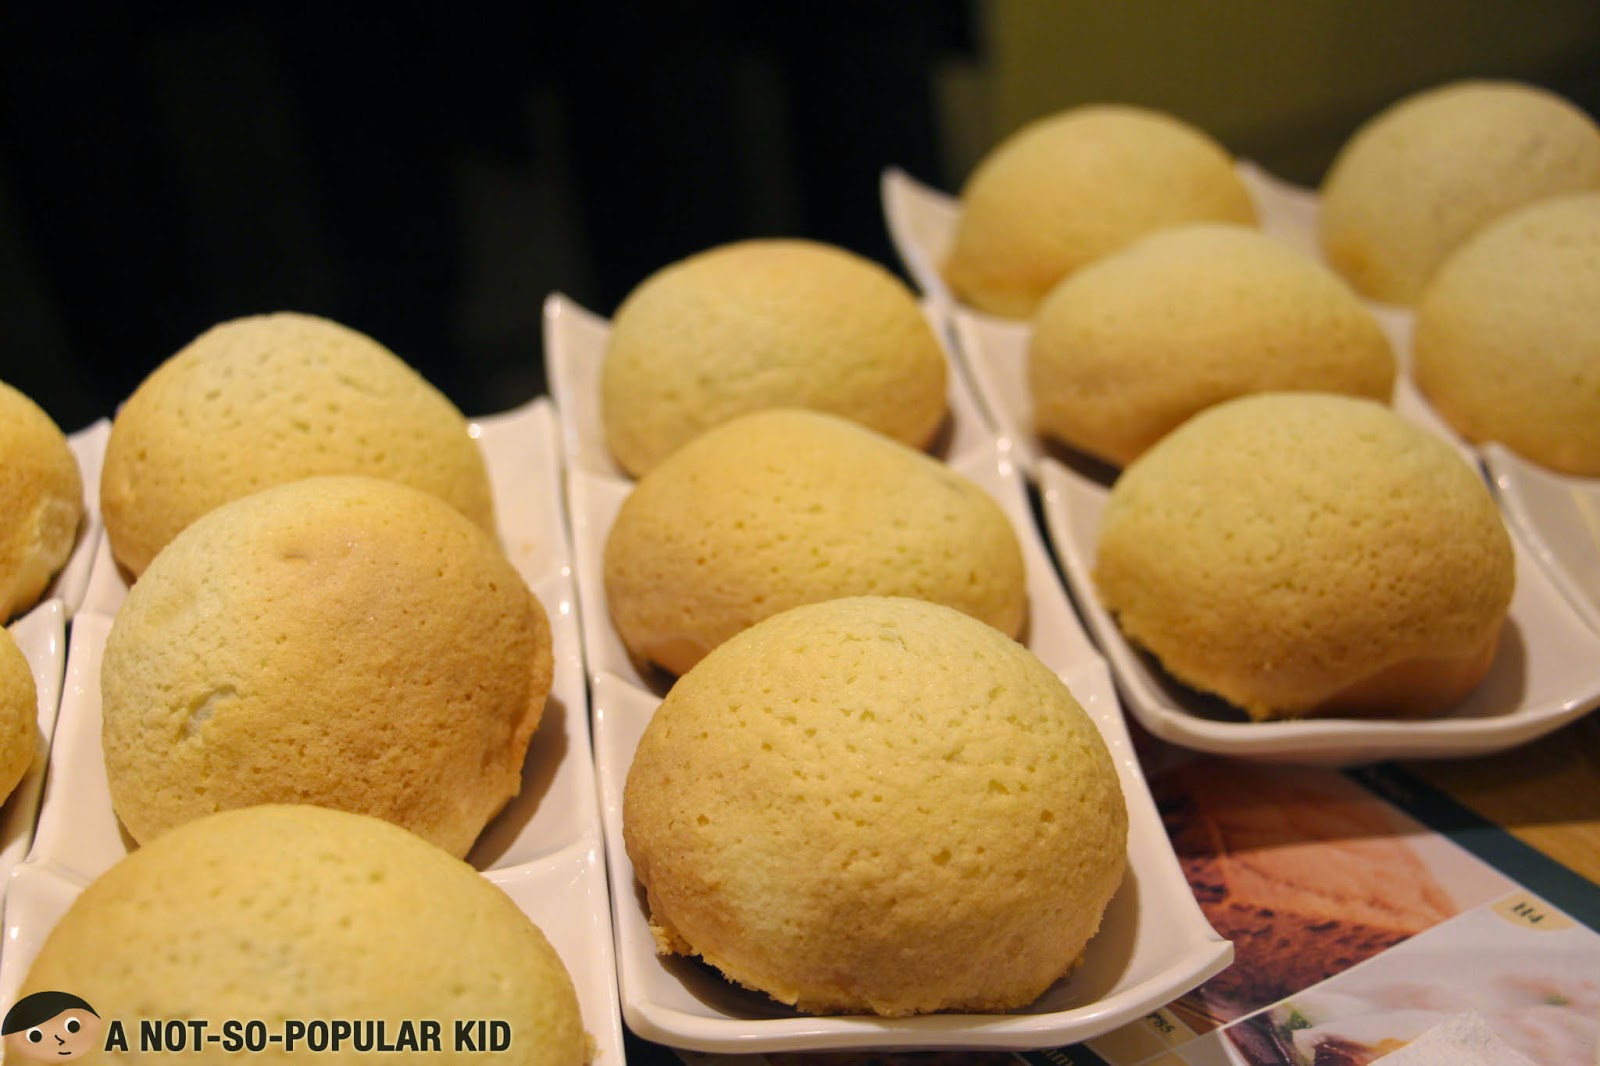 Delicate Baked Buns with Pork BBQ - a Tim Ho Wan Bestseller!